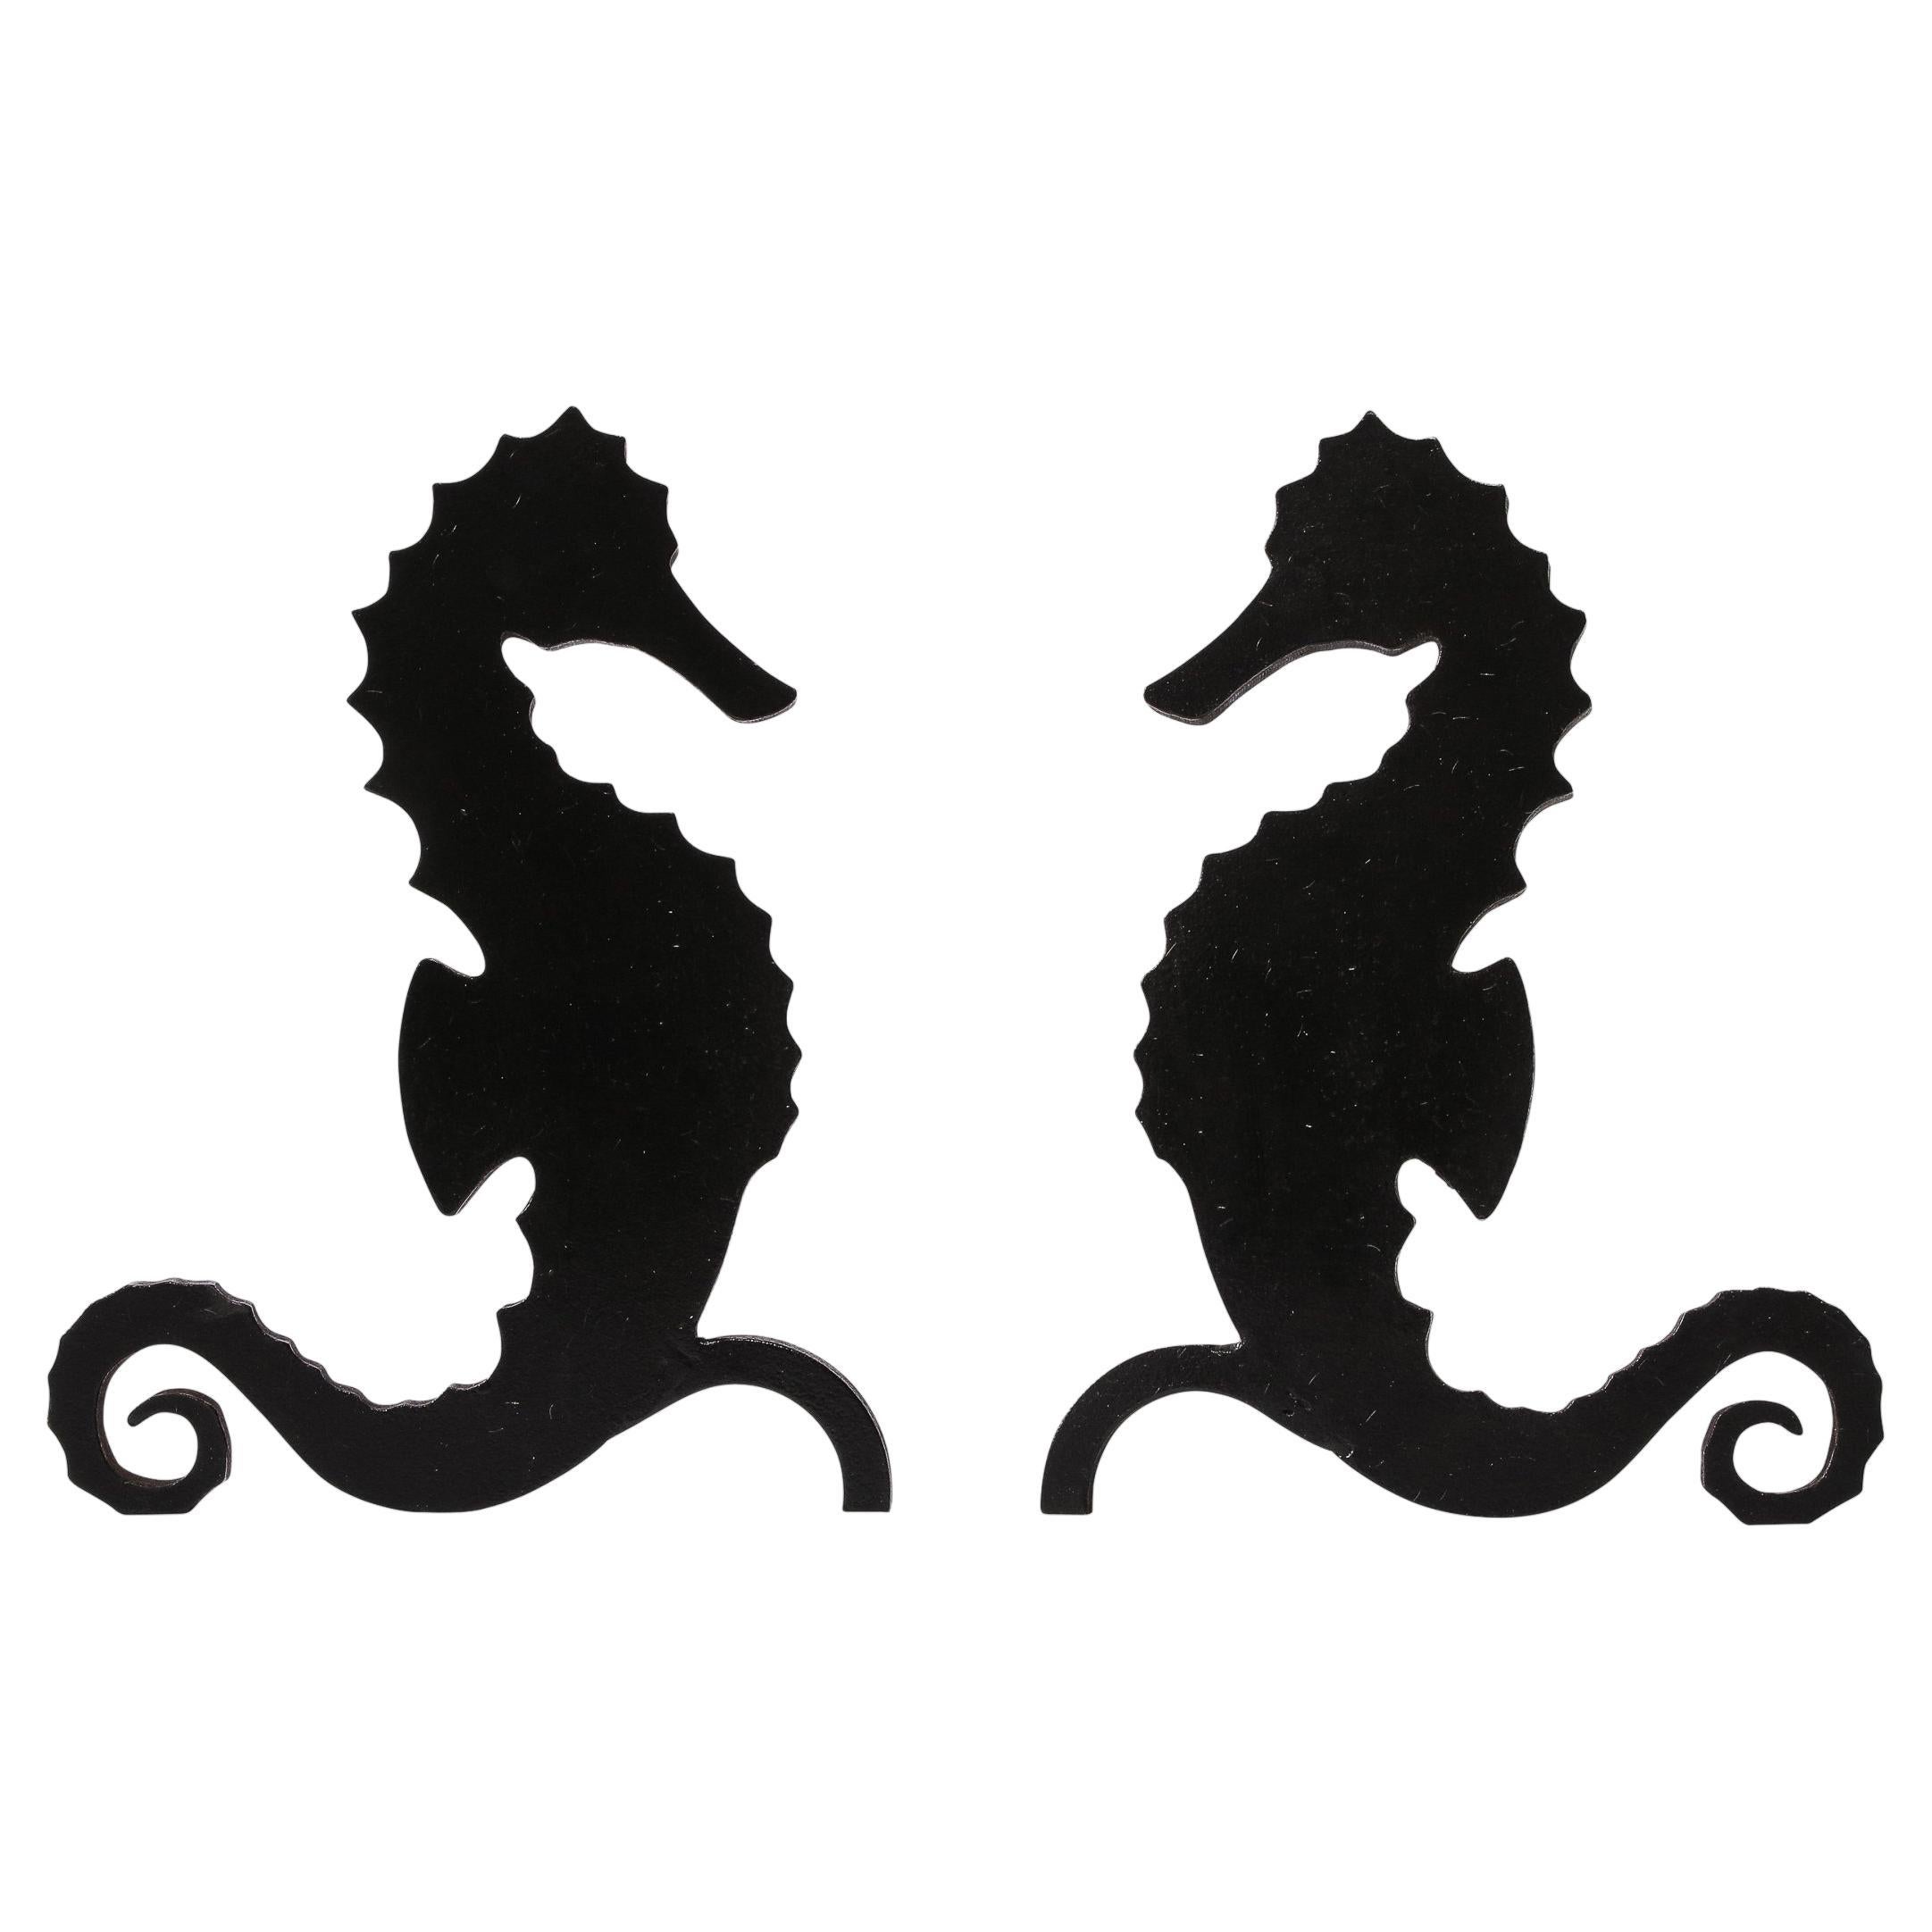 This beautiful pair of sculptural Art Deco andirons were realized in France circa 1930. They feature a dramatic and graphic silhouette of seahorses, rendered with amazing fidelity in patinated black enamel. The creatures appear at once highly